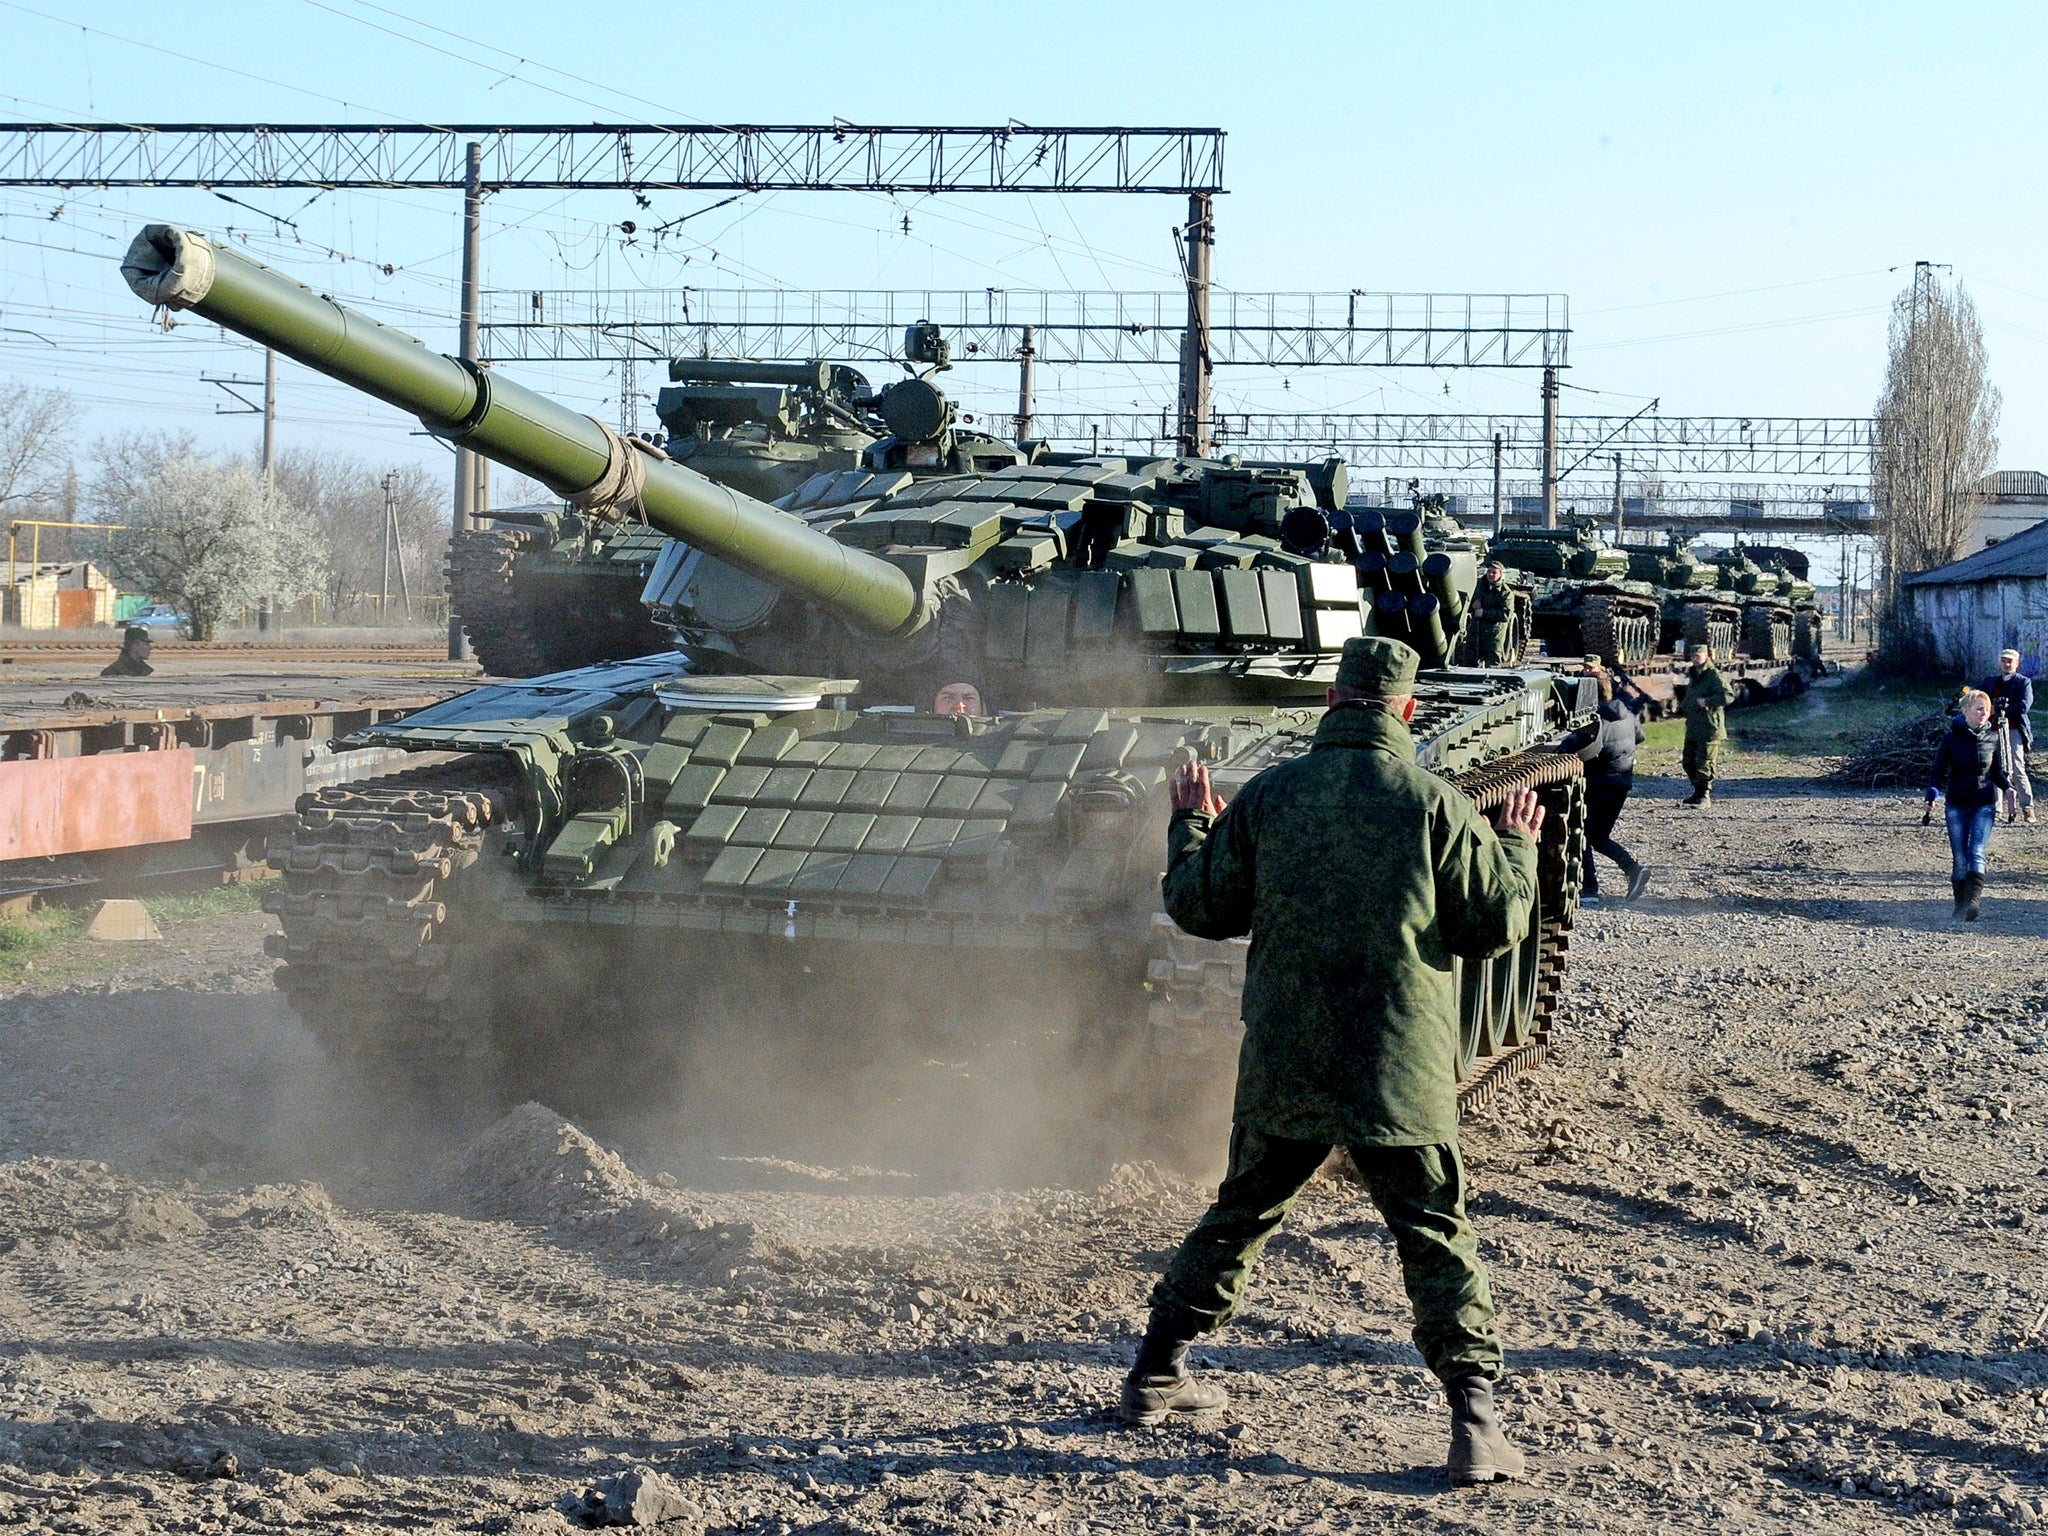 Russian troops are pictured in Crimea, which Putin annexed from Ukraine early in 2014